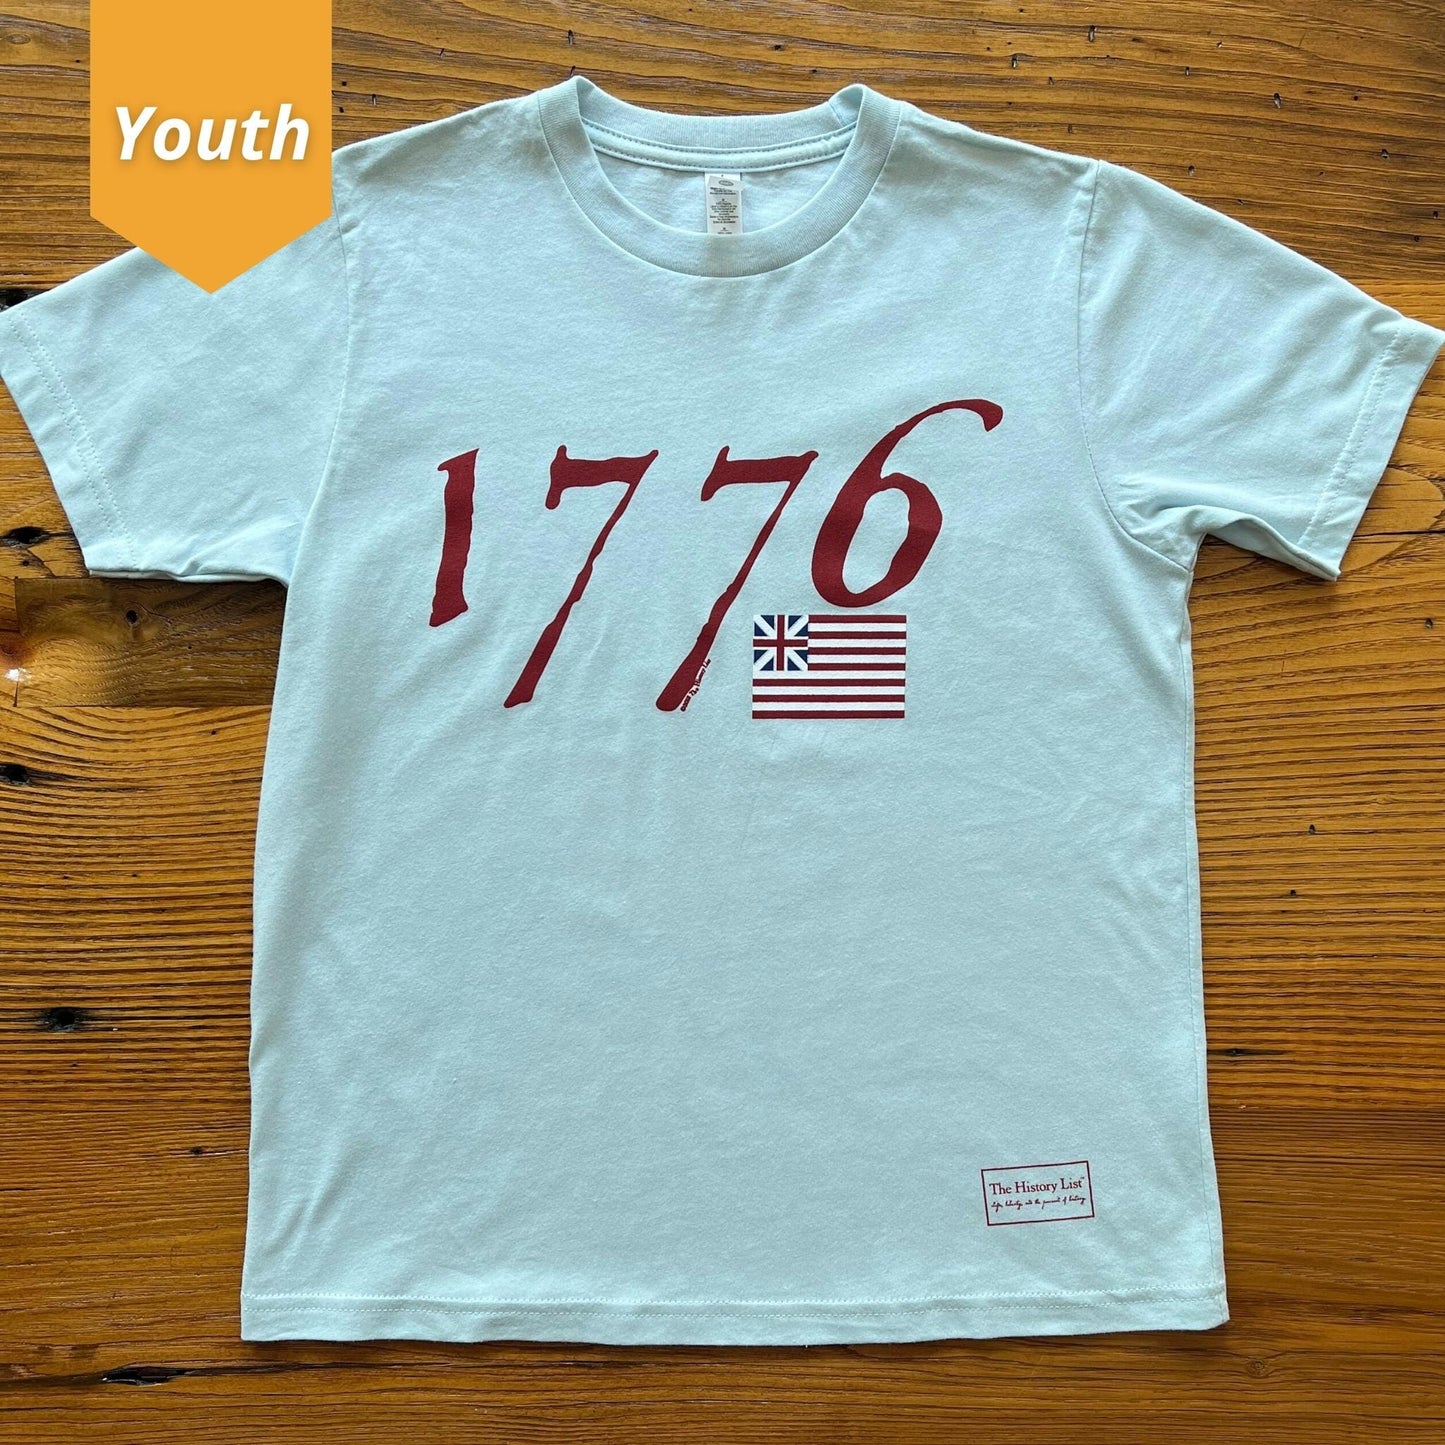 "1776 with Our Nation's First Flag" Shirt in Youth sizes in Light blue from The History List store